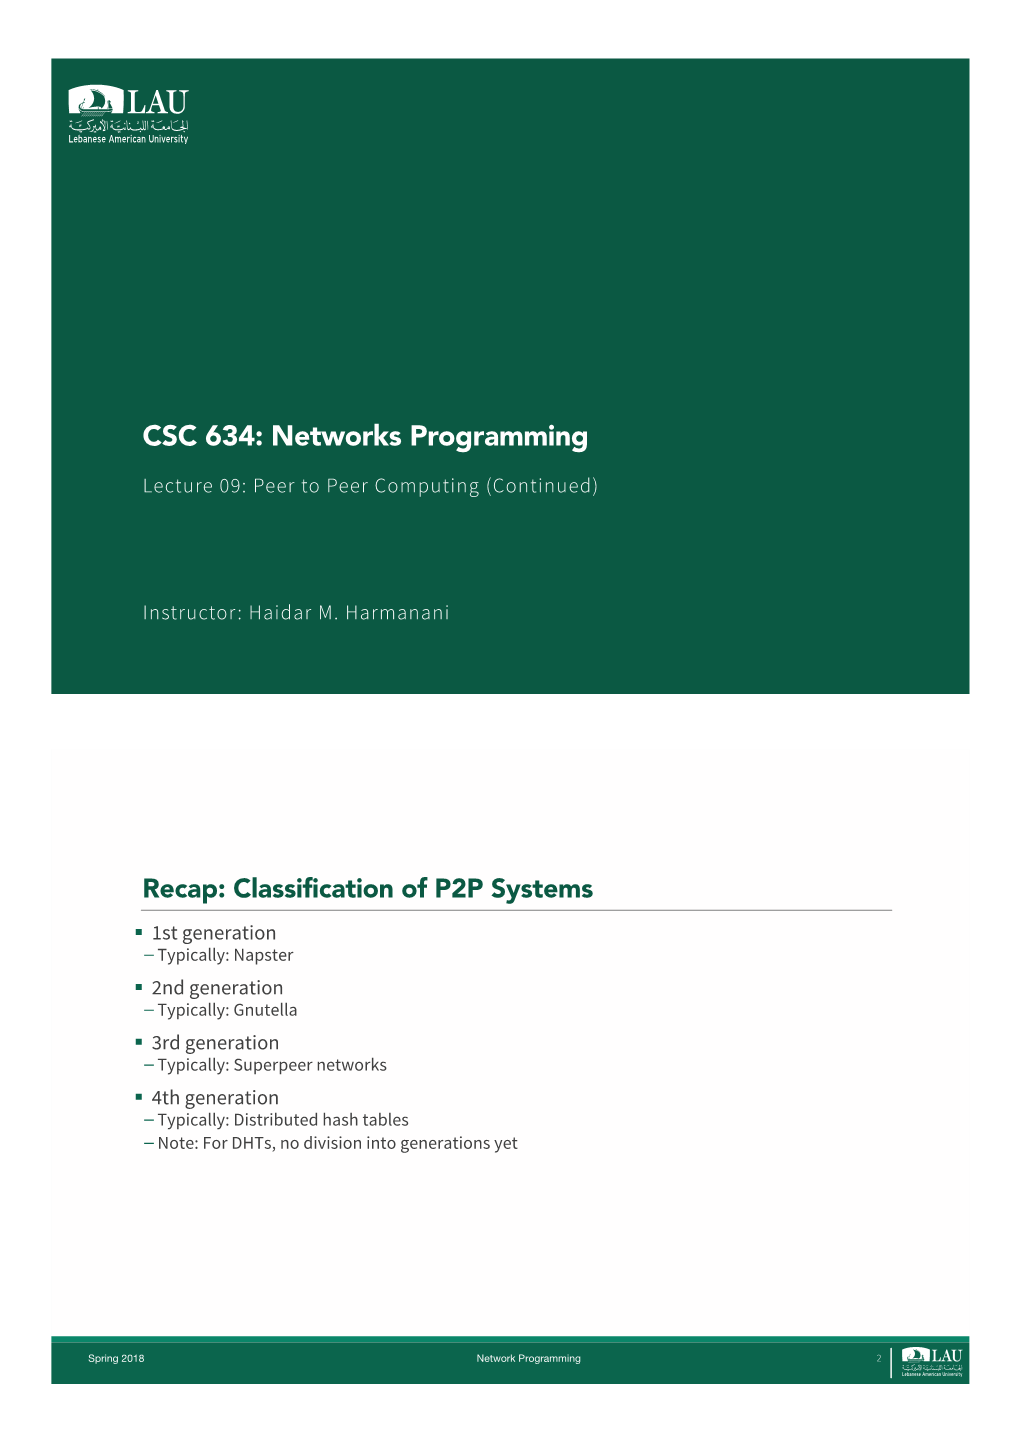 CSC 634: Networks Programming